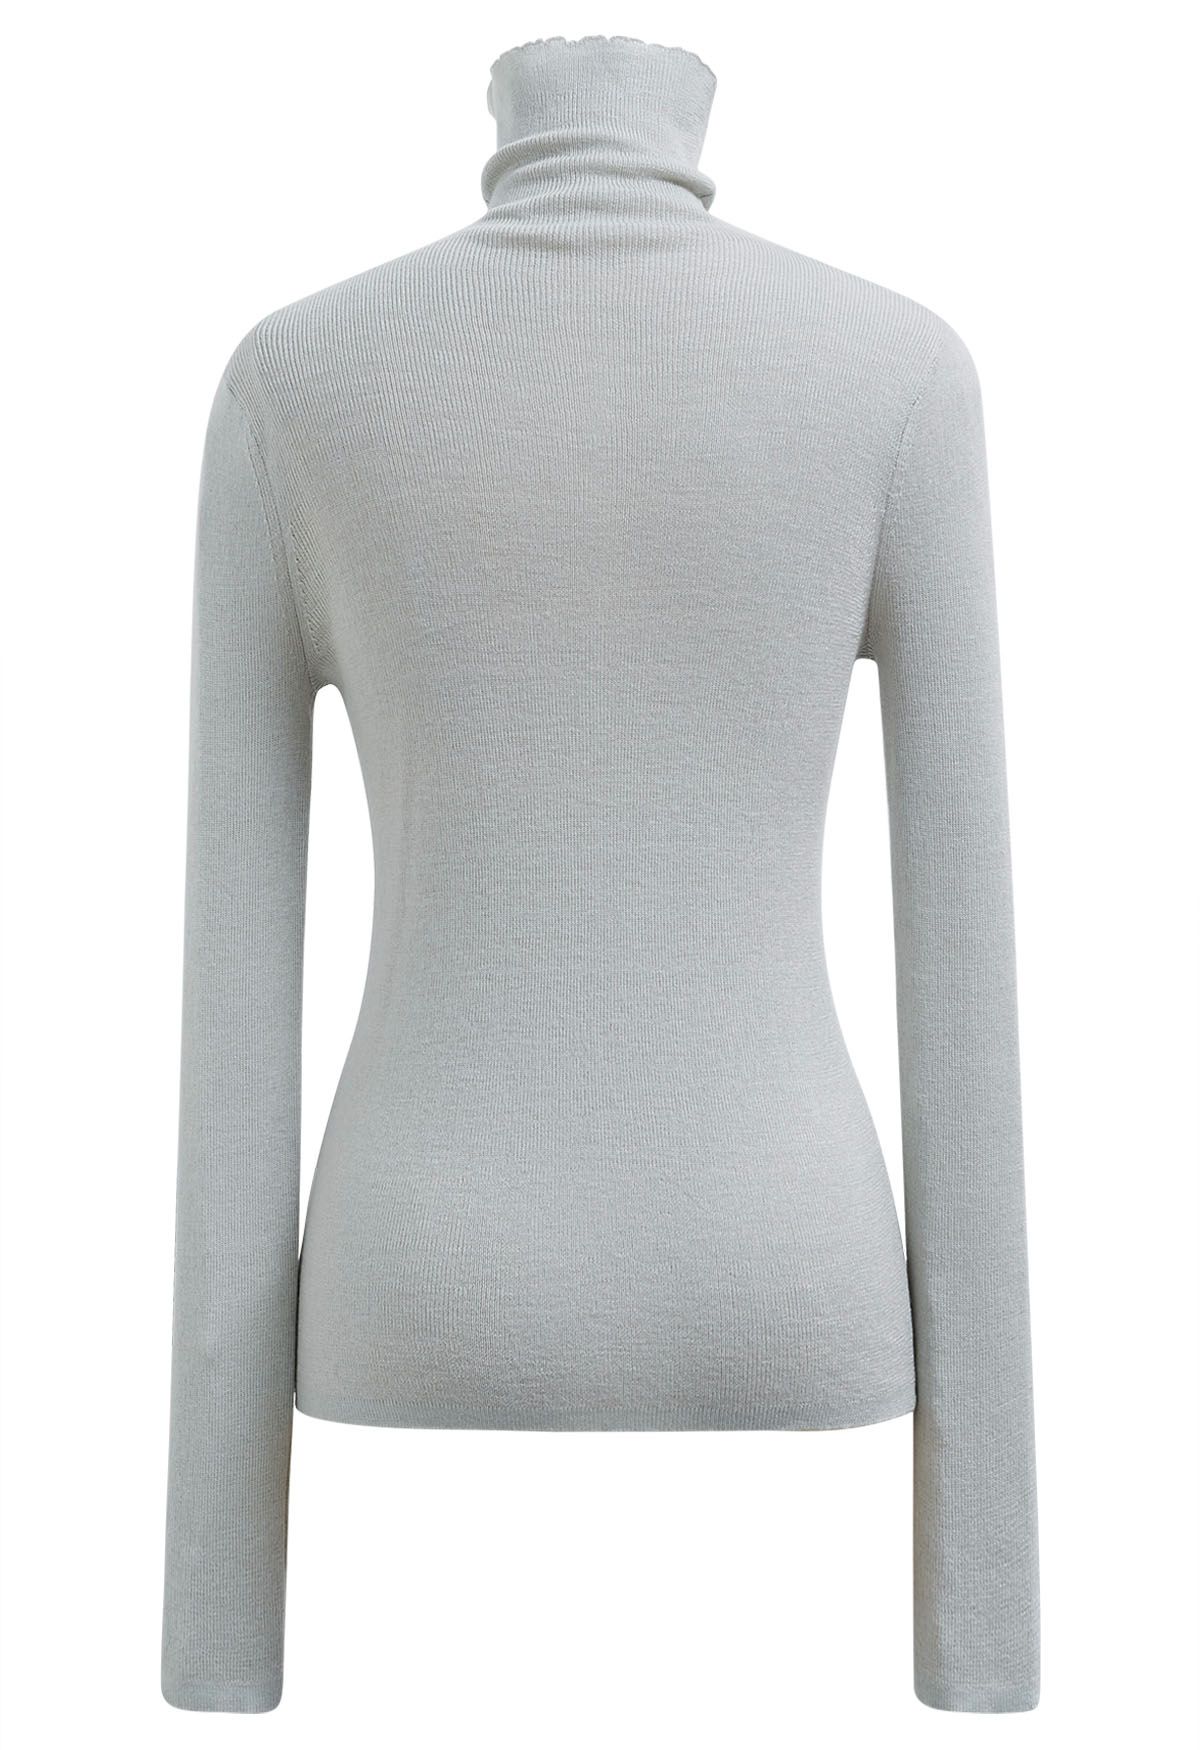 Basic High Neck Soft Knit Top in Mint